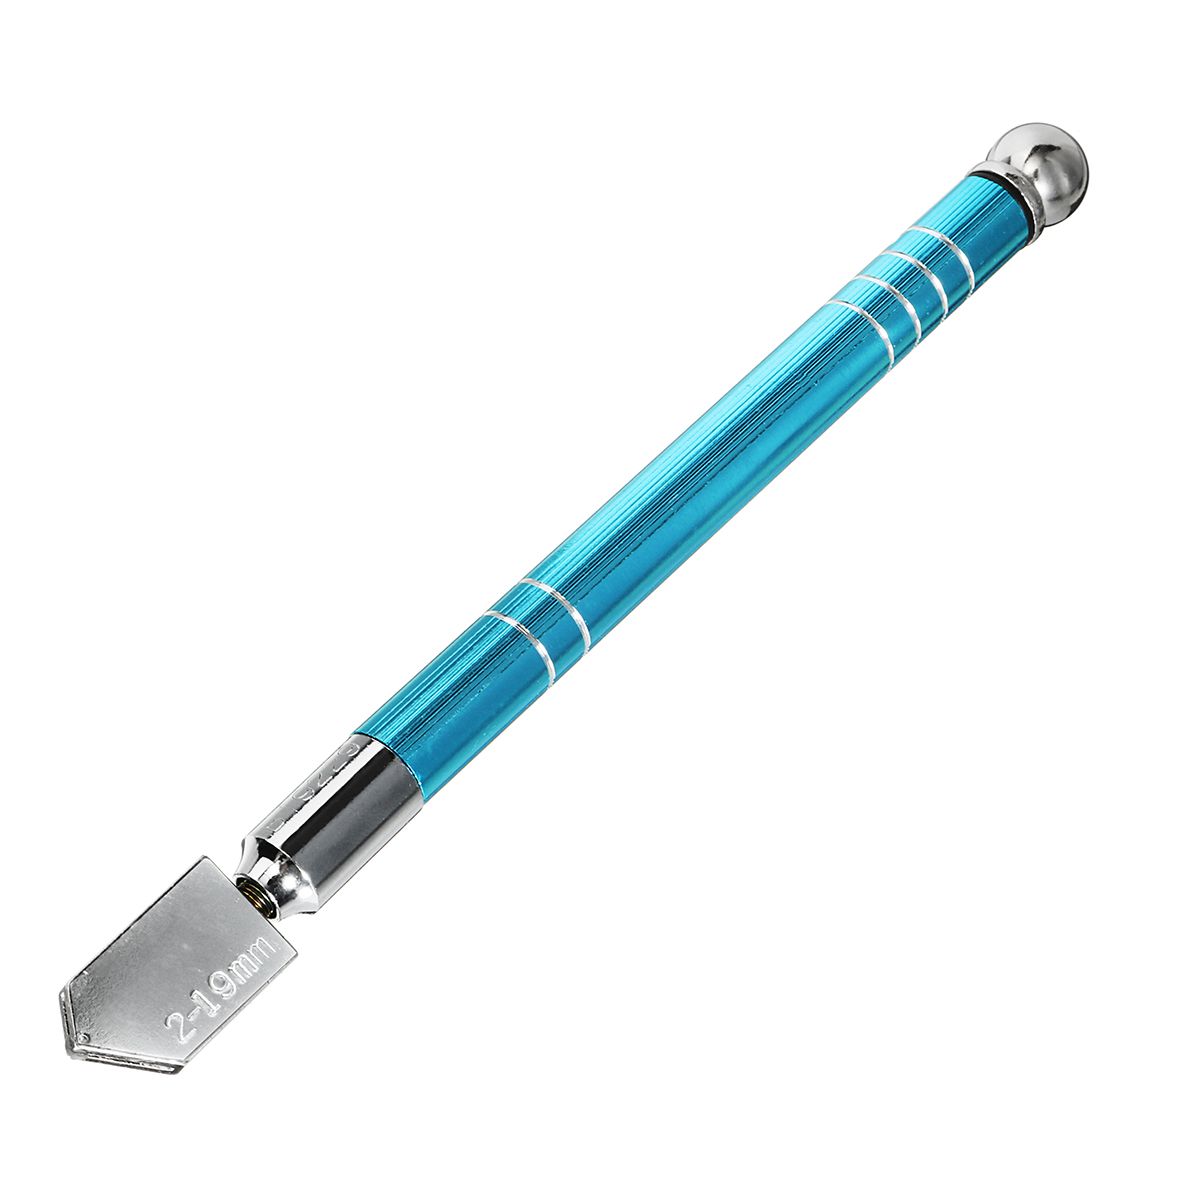 Portable-Glass-Cutter-Anti-Slip-Handle-Diamond-Minerals-Tipped-Glass-Cutter-for-2-19mm-Glass-1285318